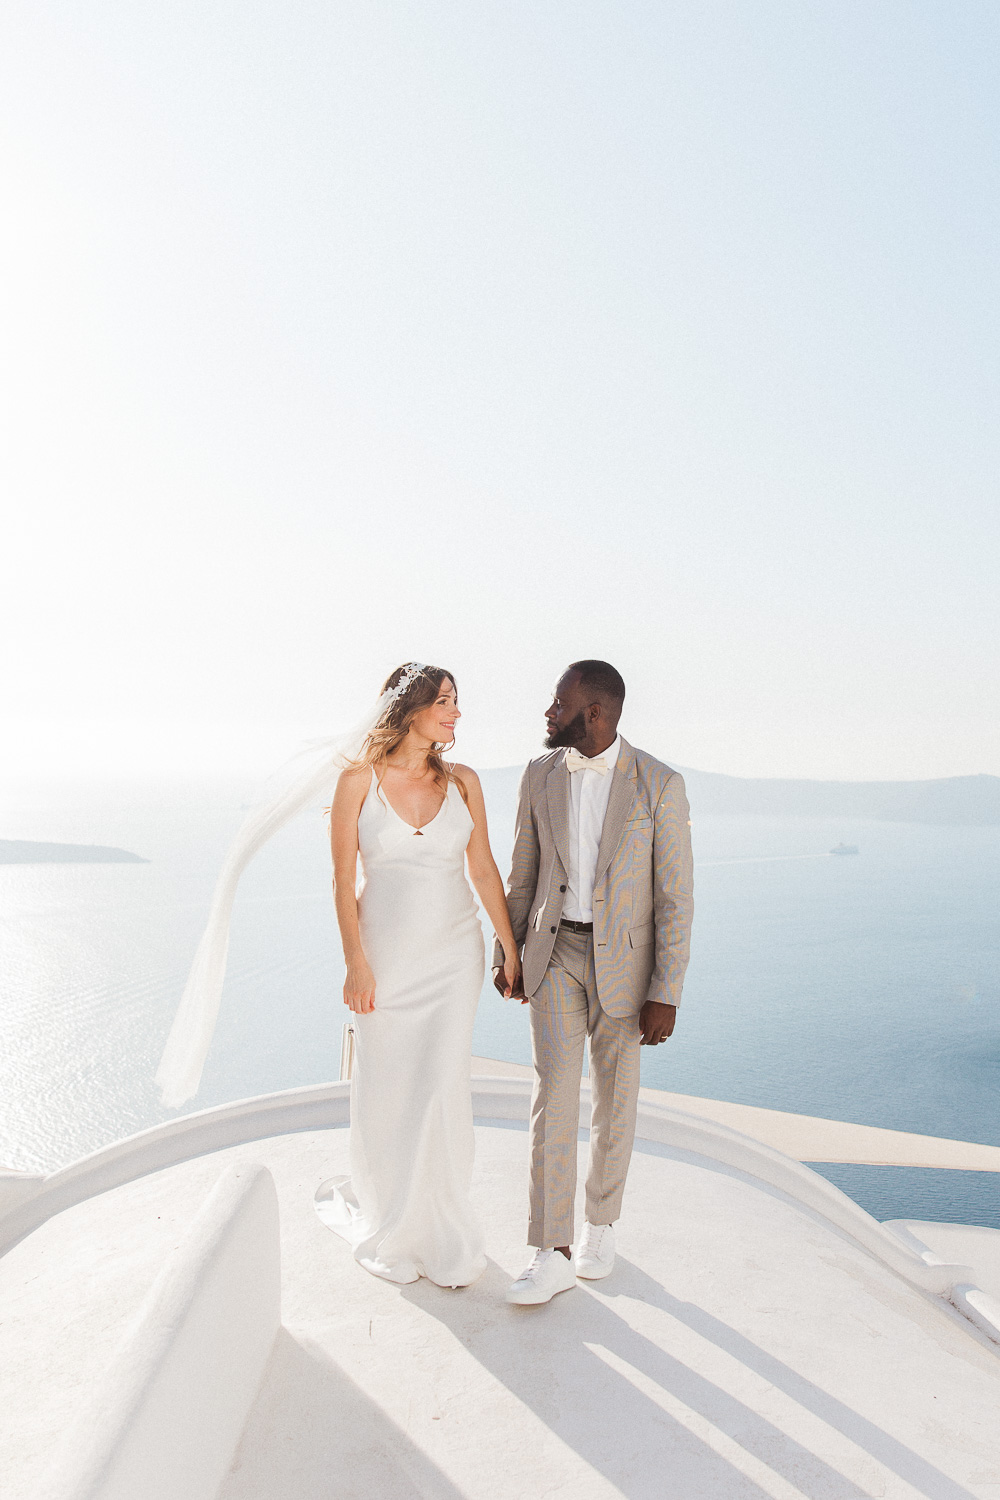 Bride and groom walking on a Santorini rooftop on their wedding day